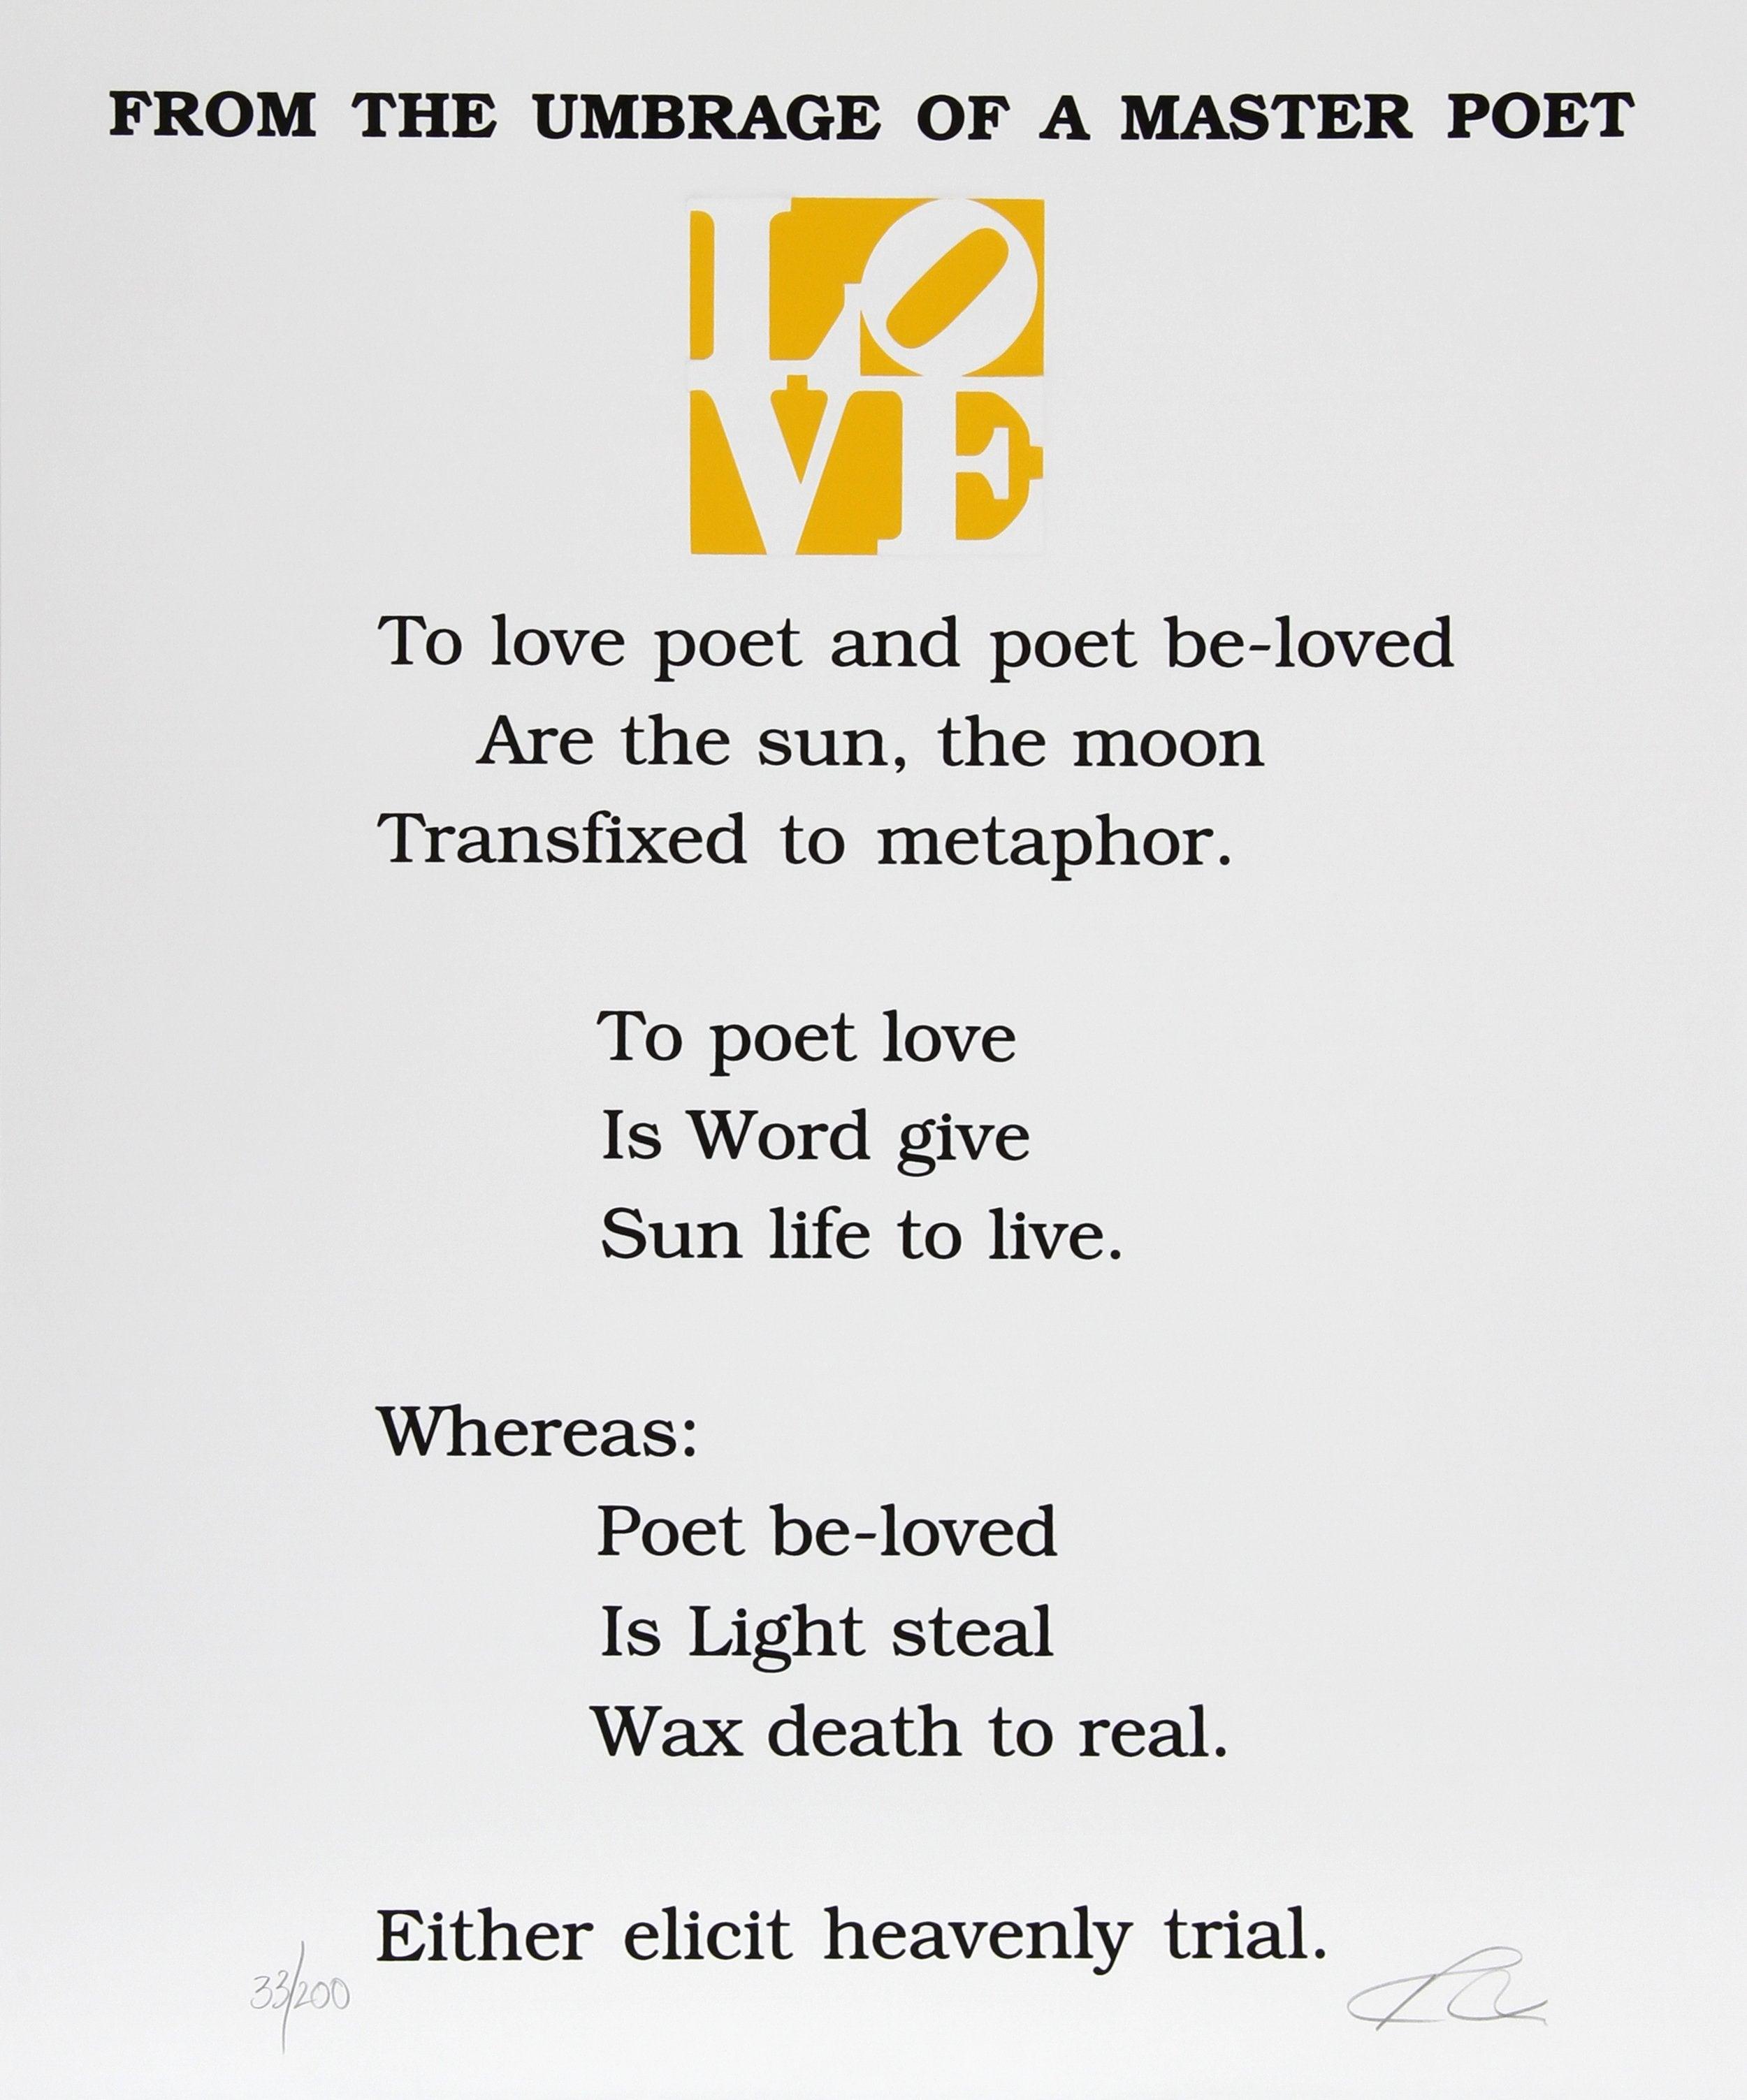 imagery poems about life